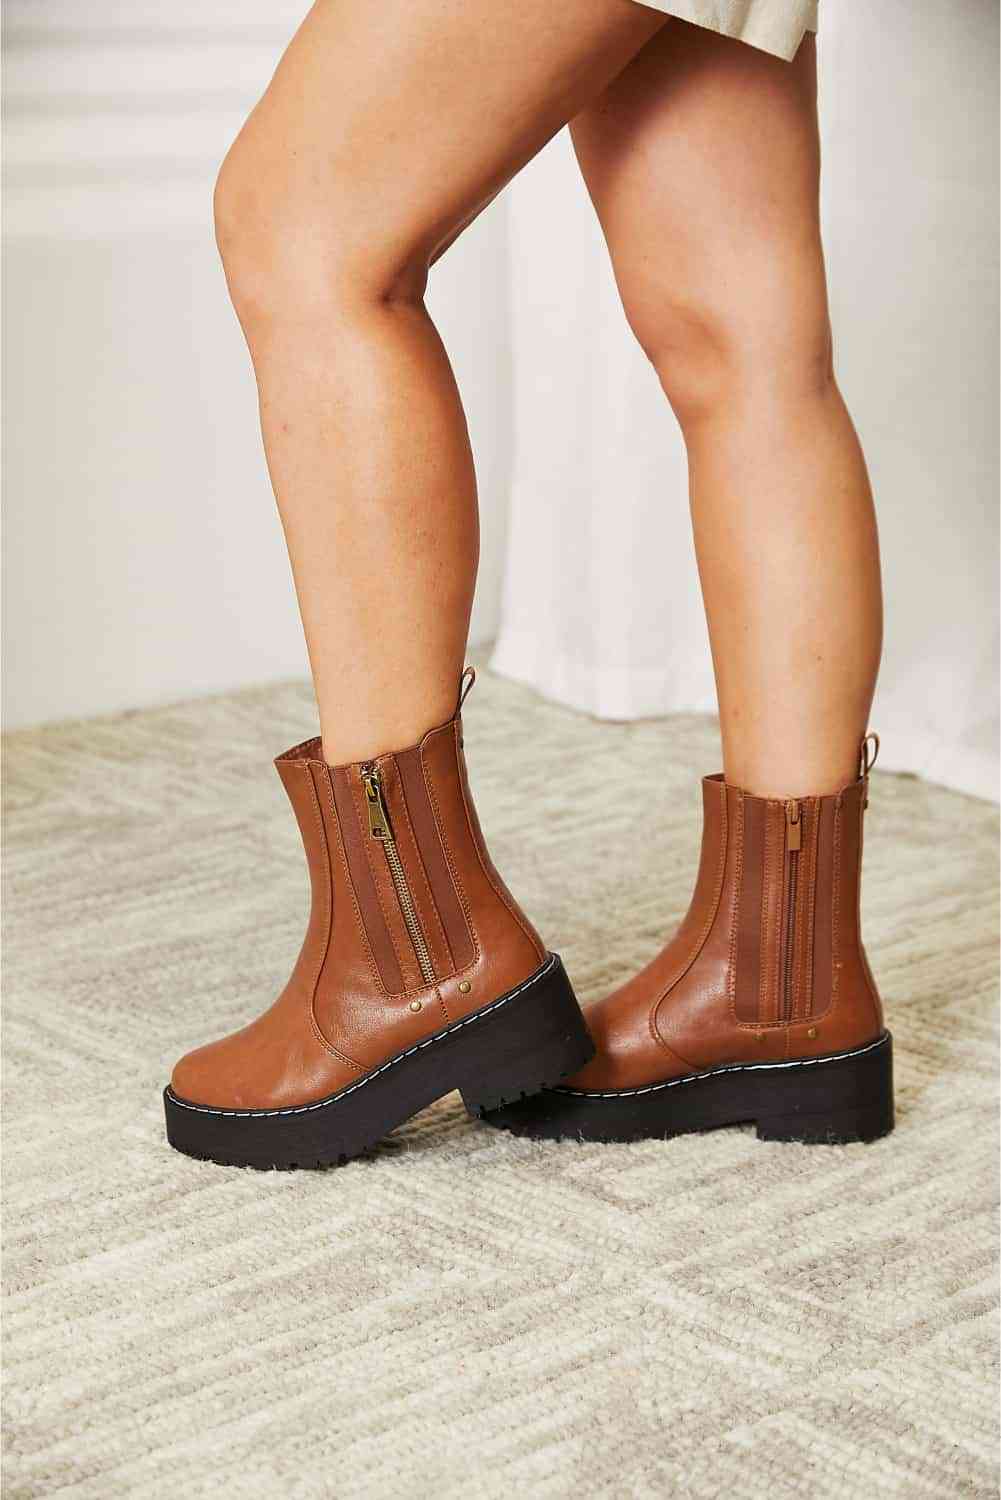 Light Gray Forever Link Side Zip Platform Boots Sentient Beauty Fashions Apparel & Accessories